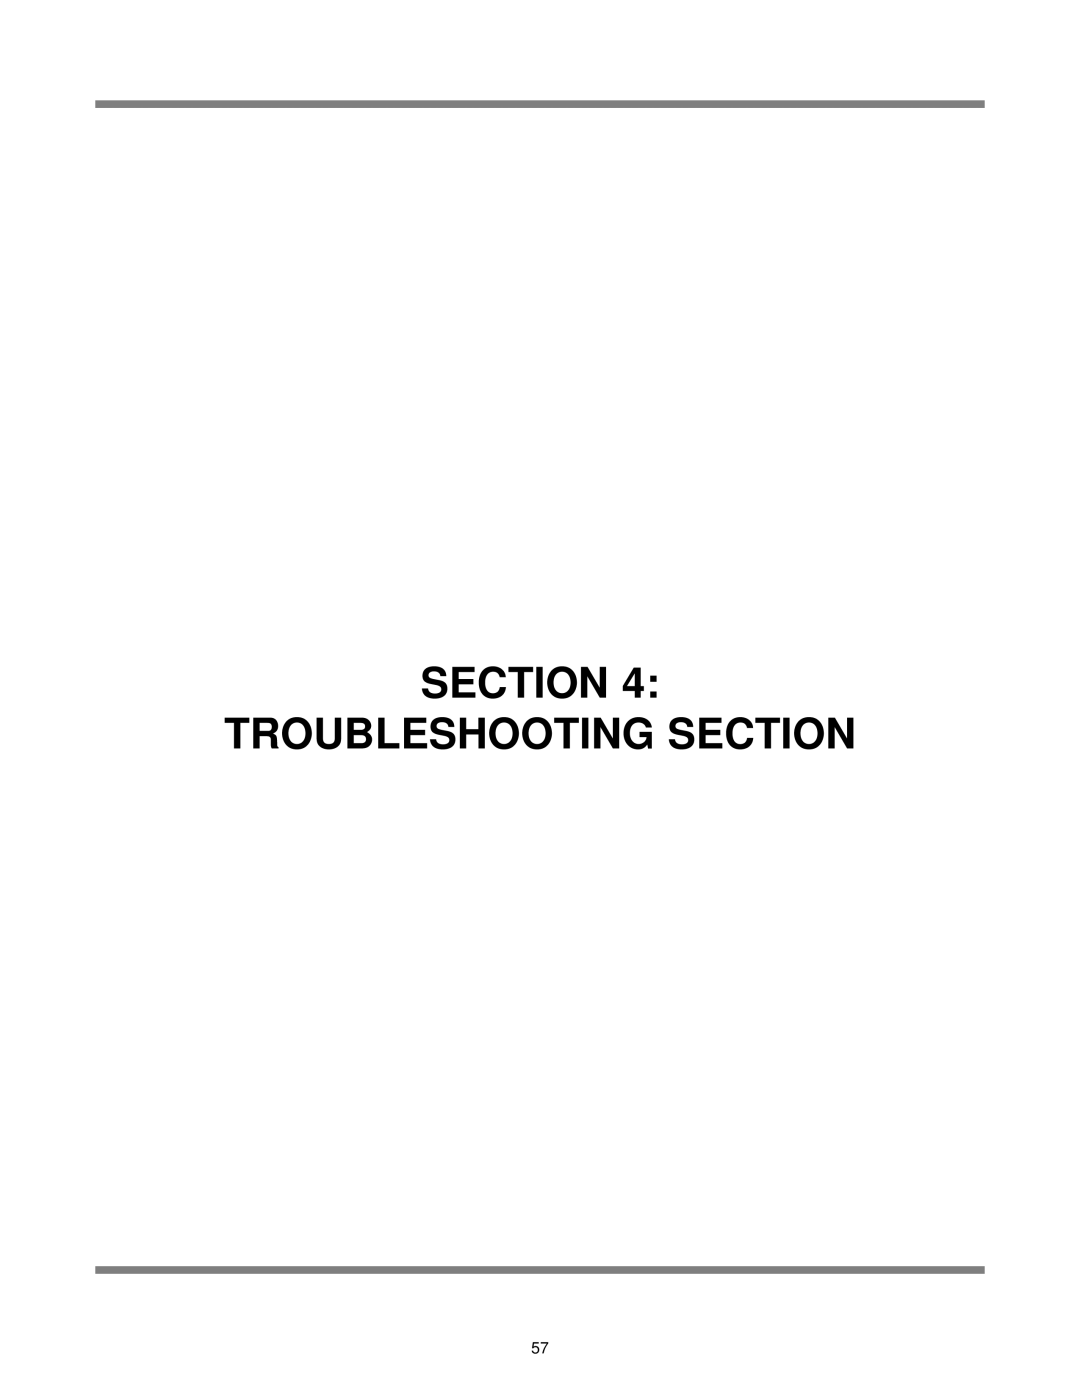 Jackson AJ-44 technical manual Section Troubleshooting Section 